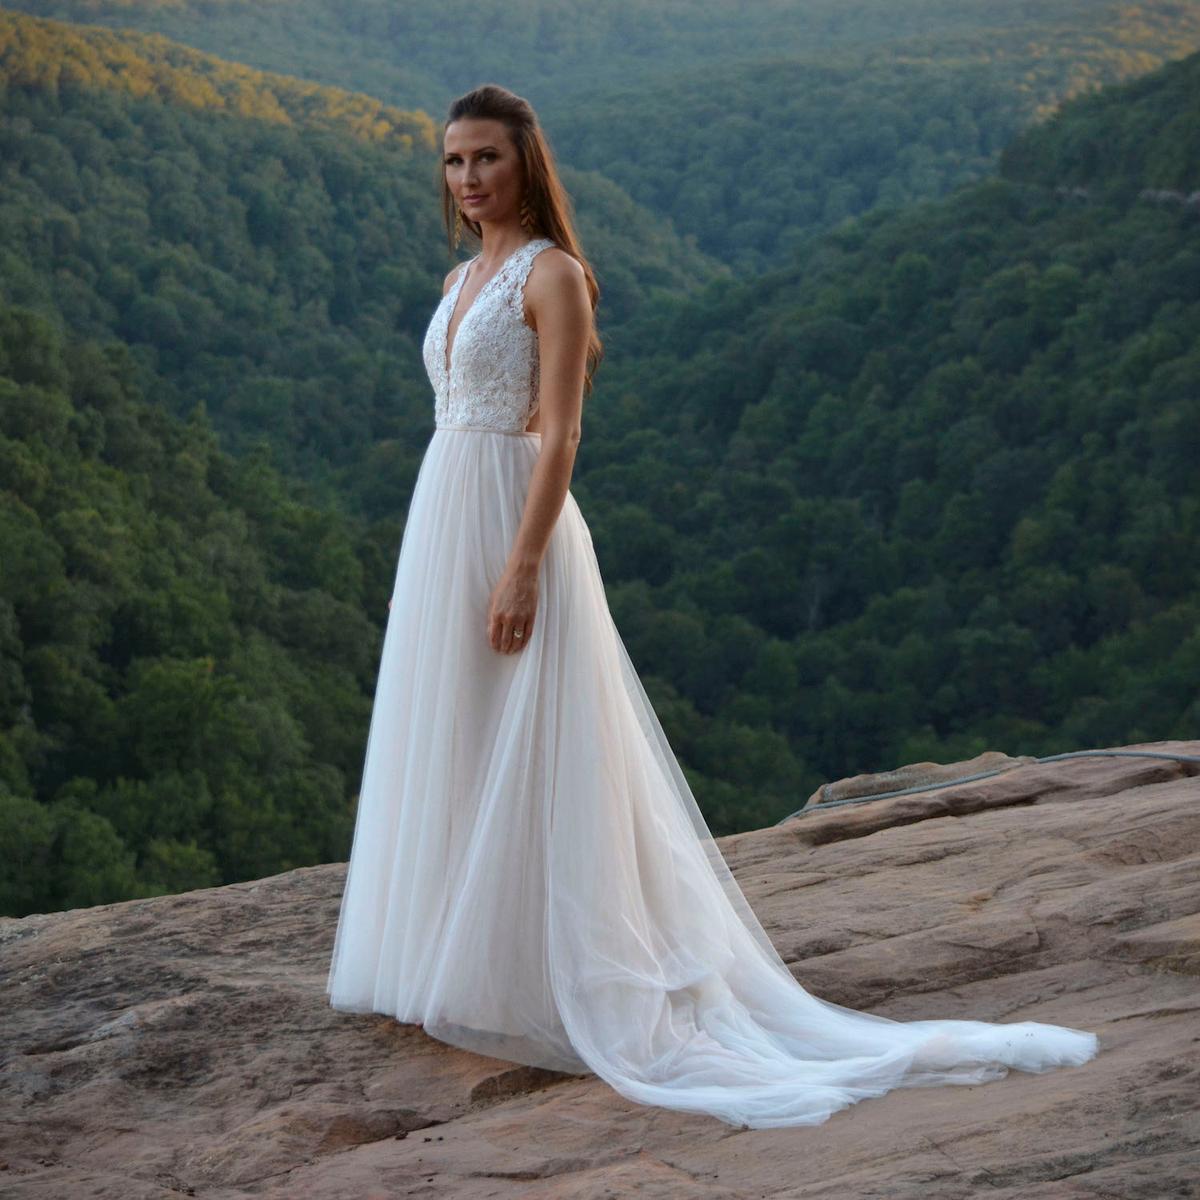 Skye Myers donned a beautiful full-length wedding gown. (Caters News)